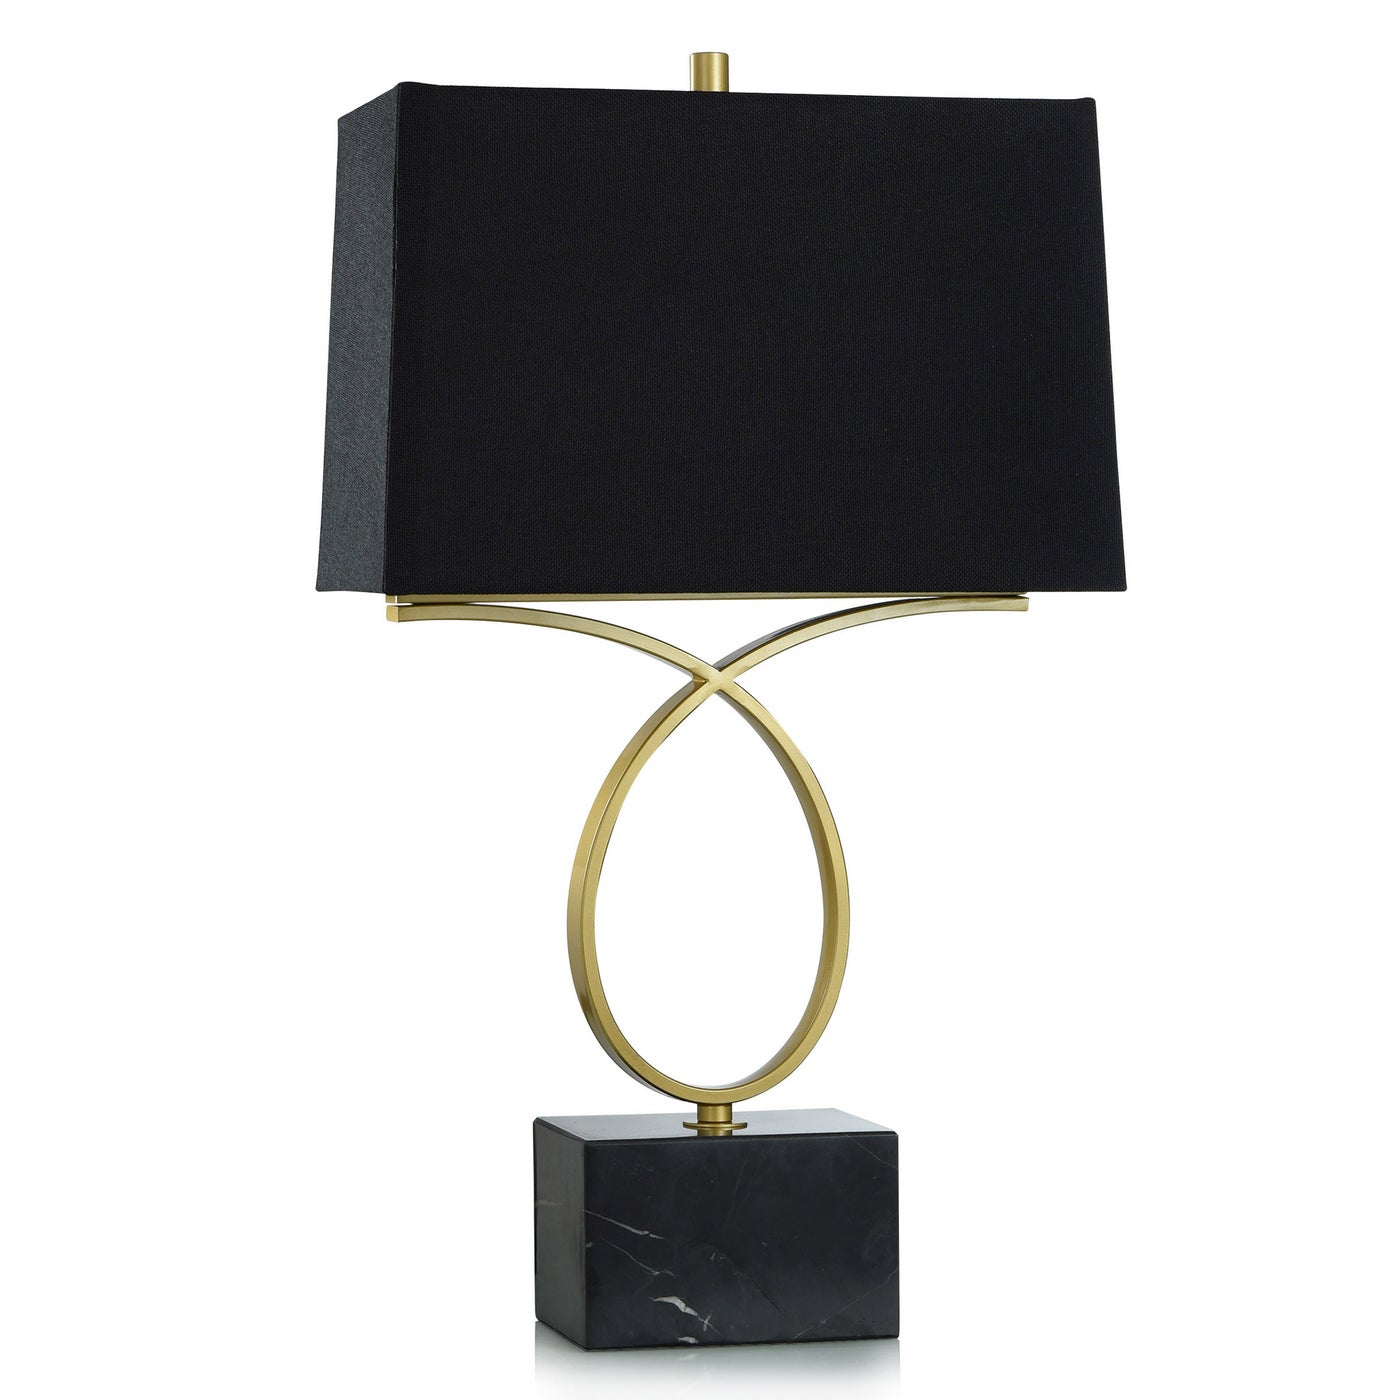 SAFFRON TABLE LAMPS | Brass Finish on Metal with Black Marble Base | Hardback Shade